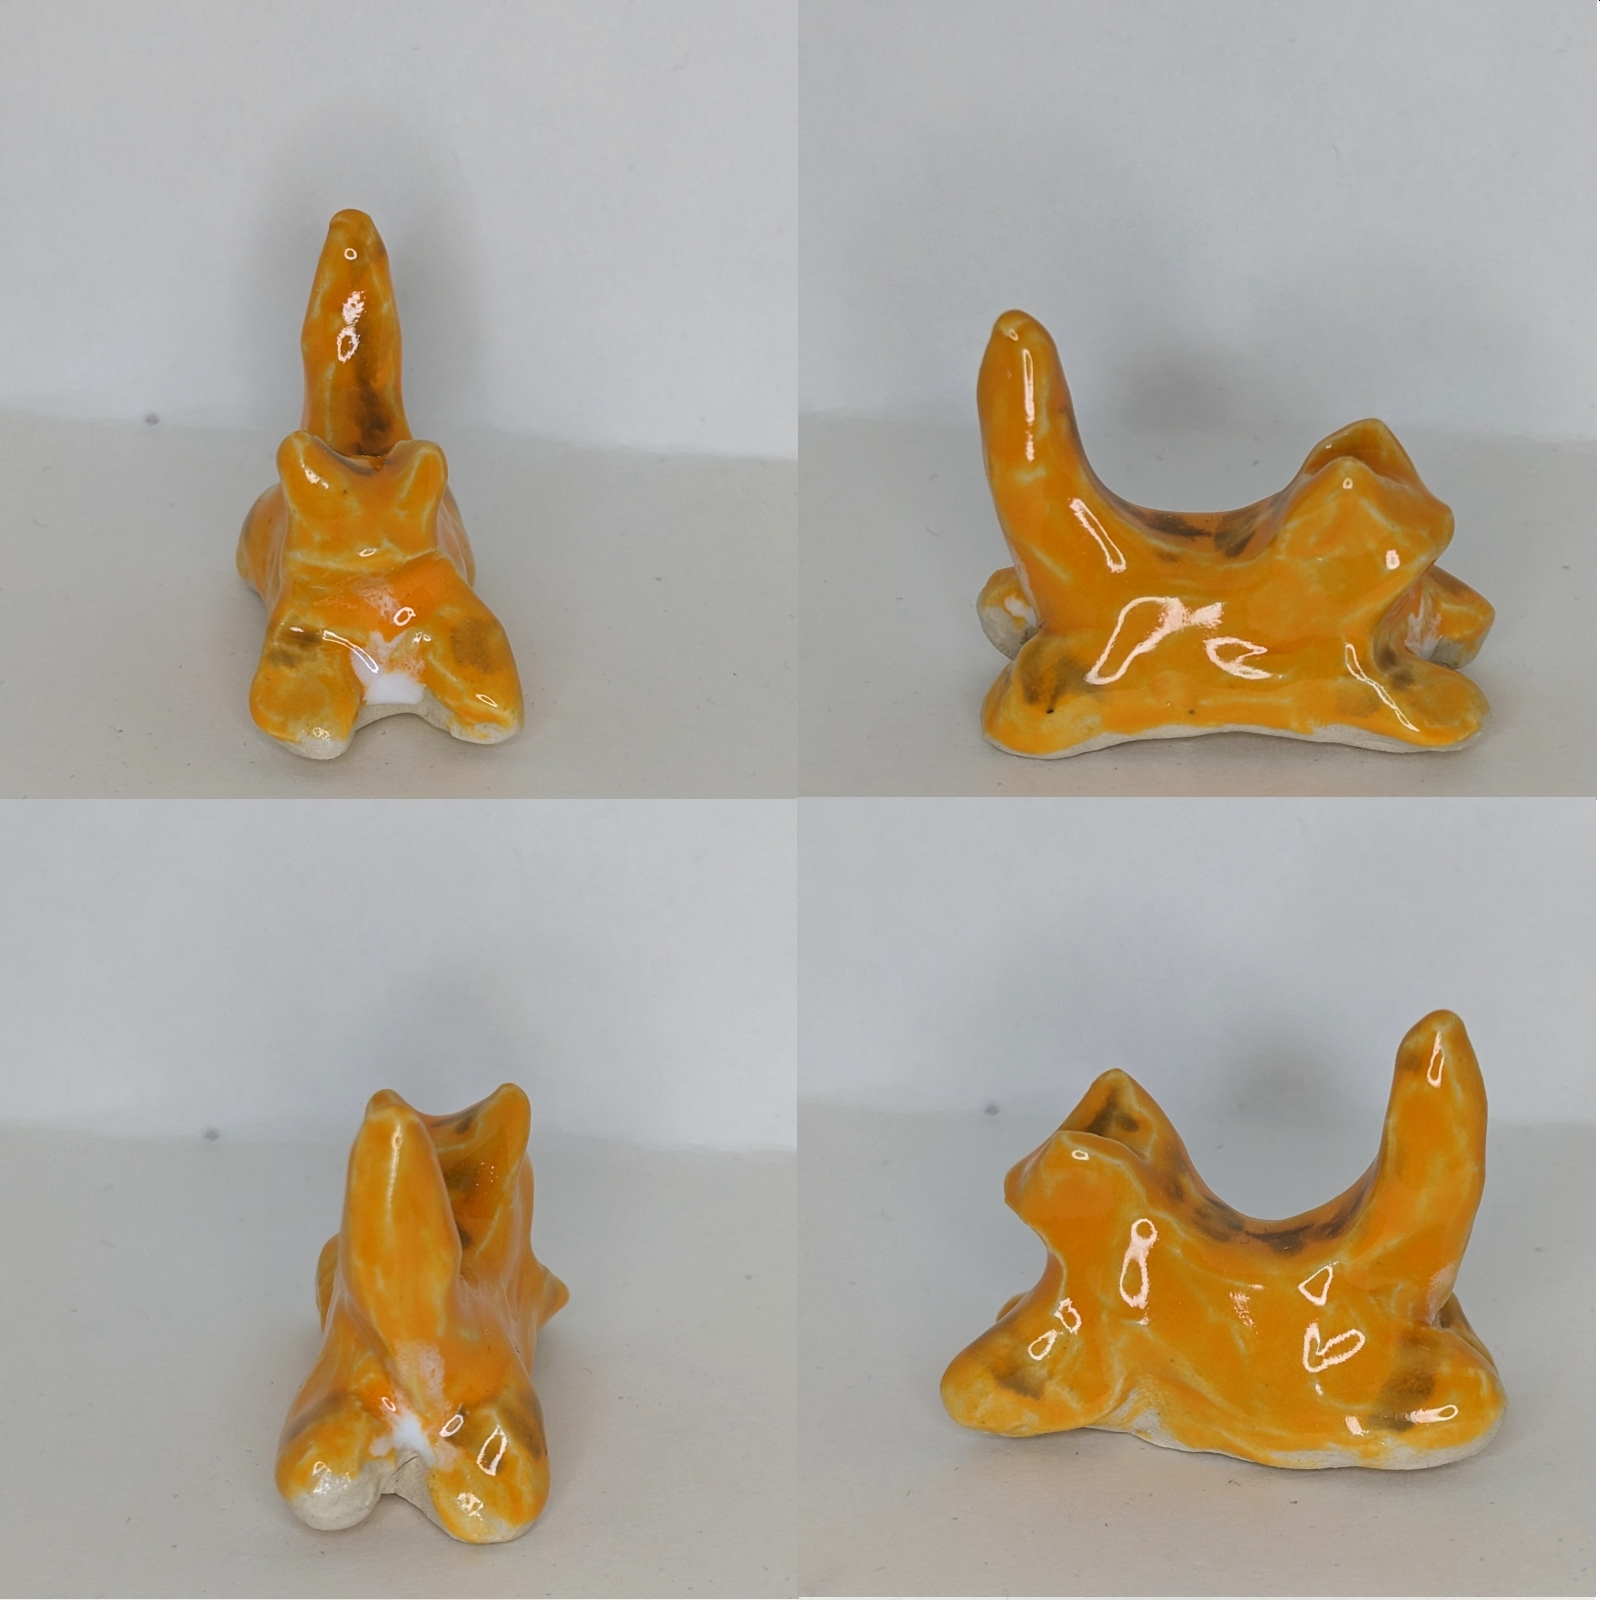 4 views of a small orange ceramic cat in a splayed out position. It has striping.